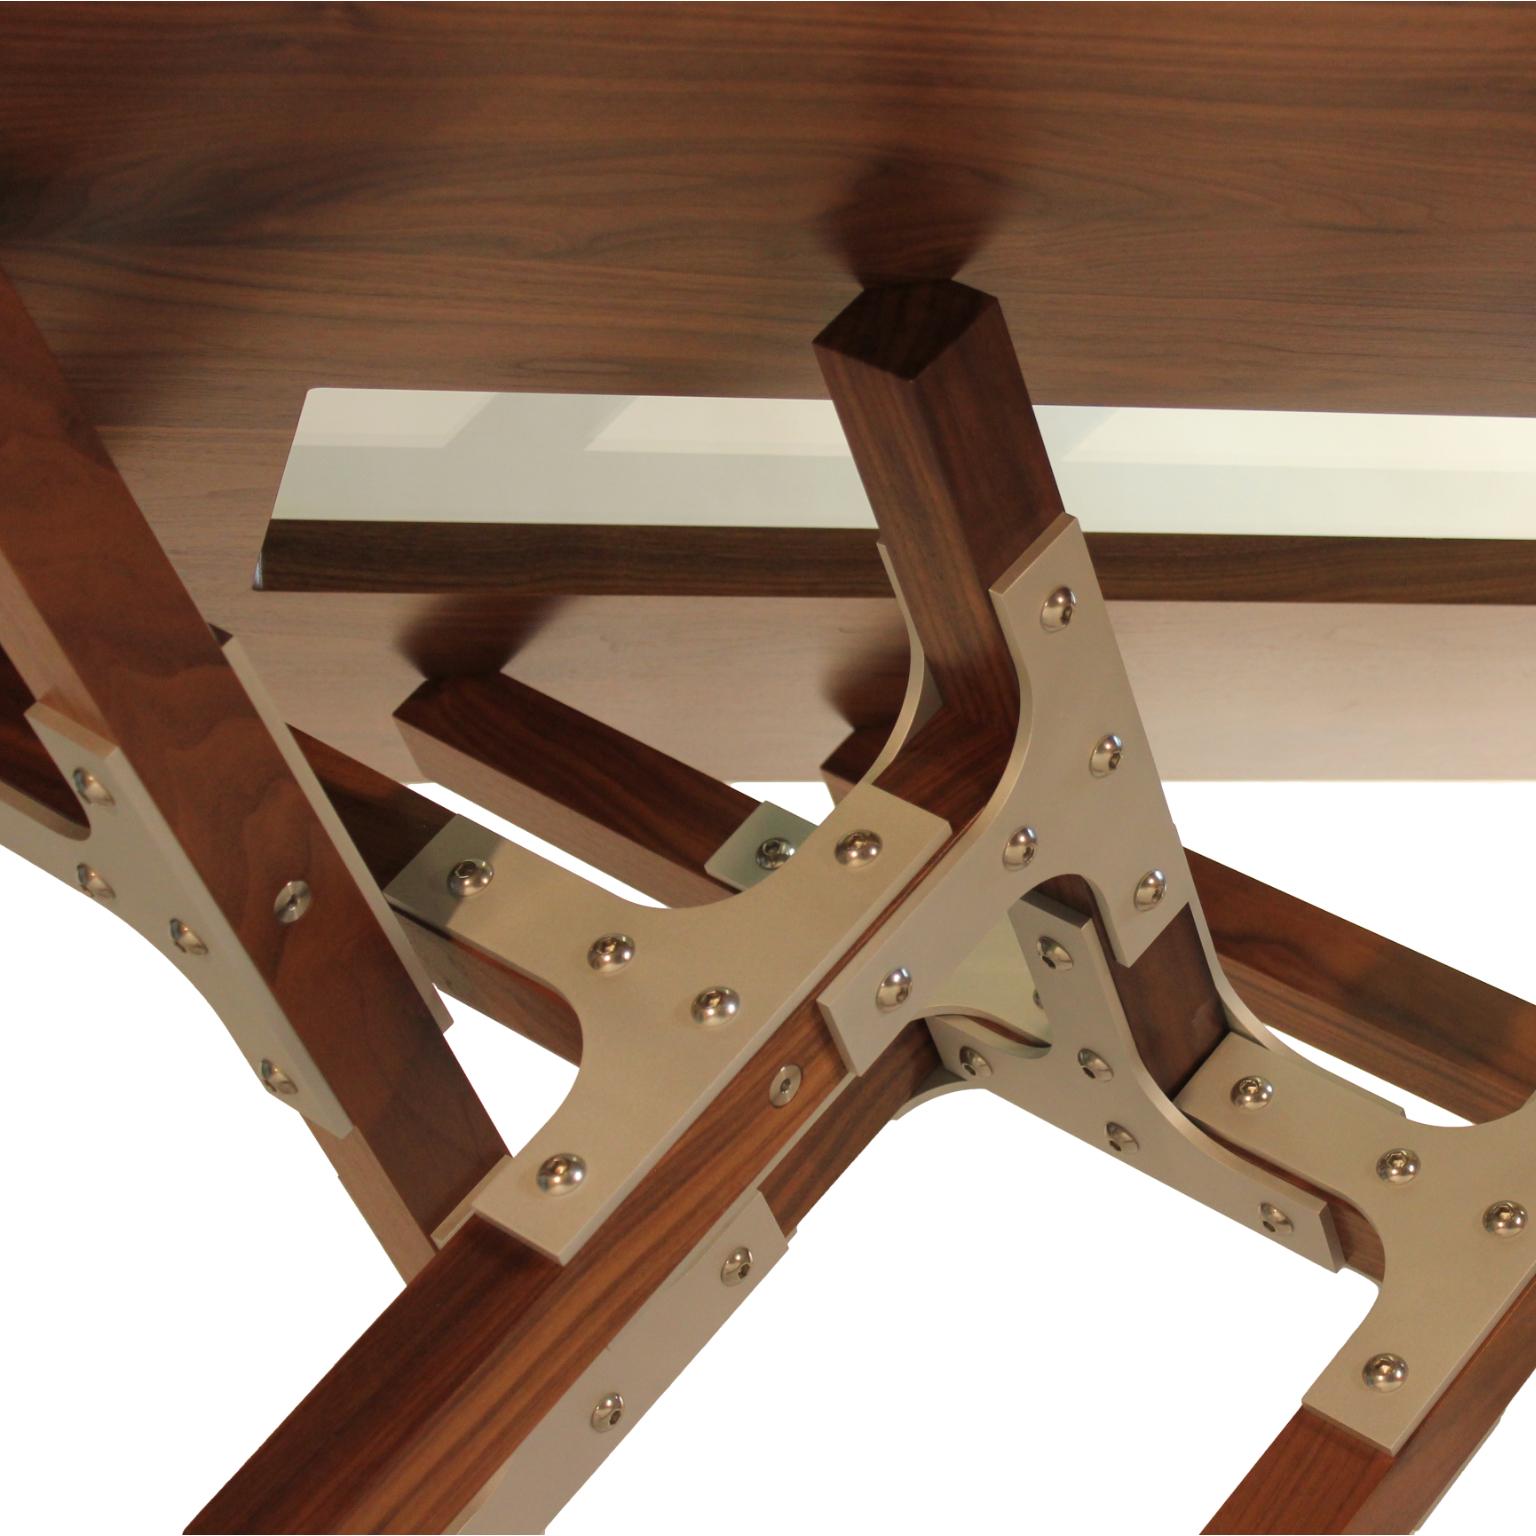 The Saratoga dining table by Peter Harrison has a dynamic base made from walnut squares and aluminum brackets. The design is almost crystalline as it radiates up to support the walnut top. There is a tempered glass window through the top to view the